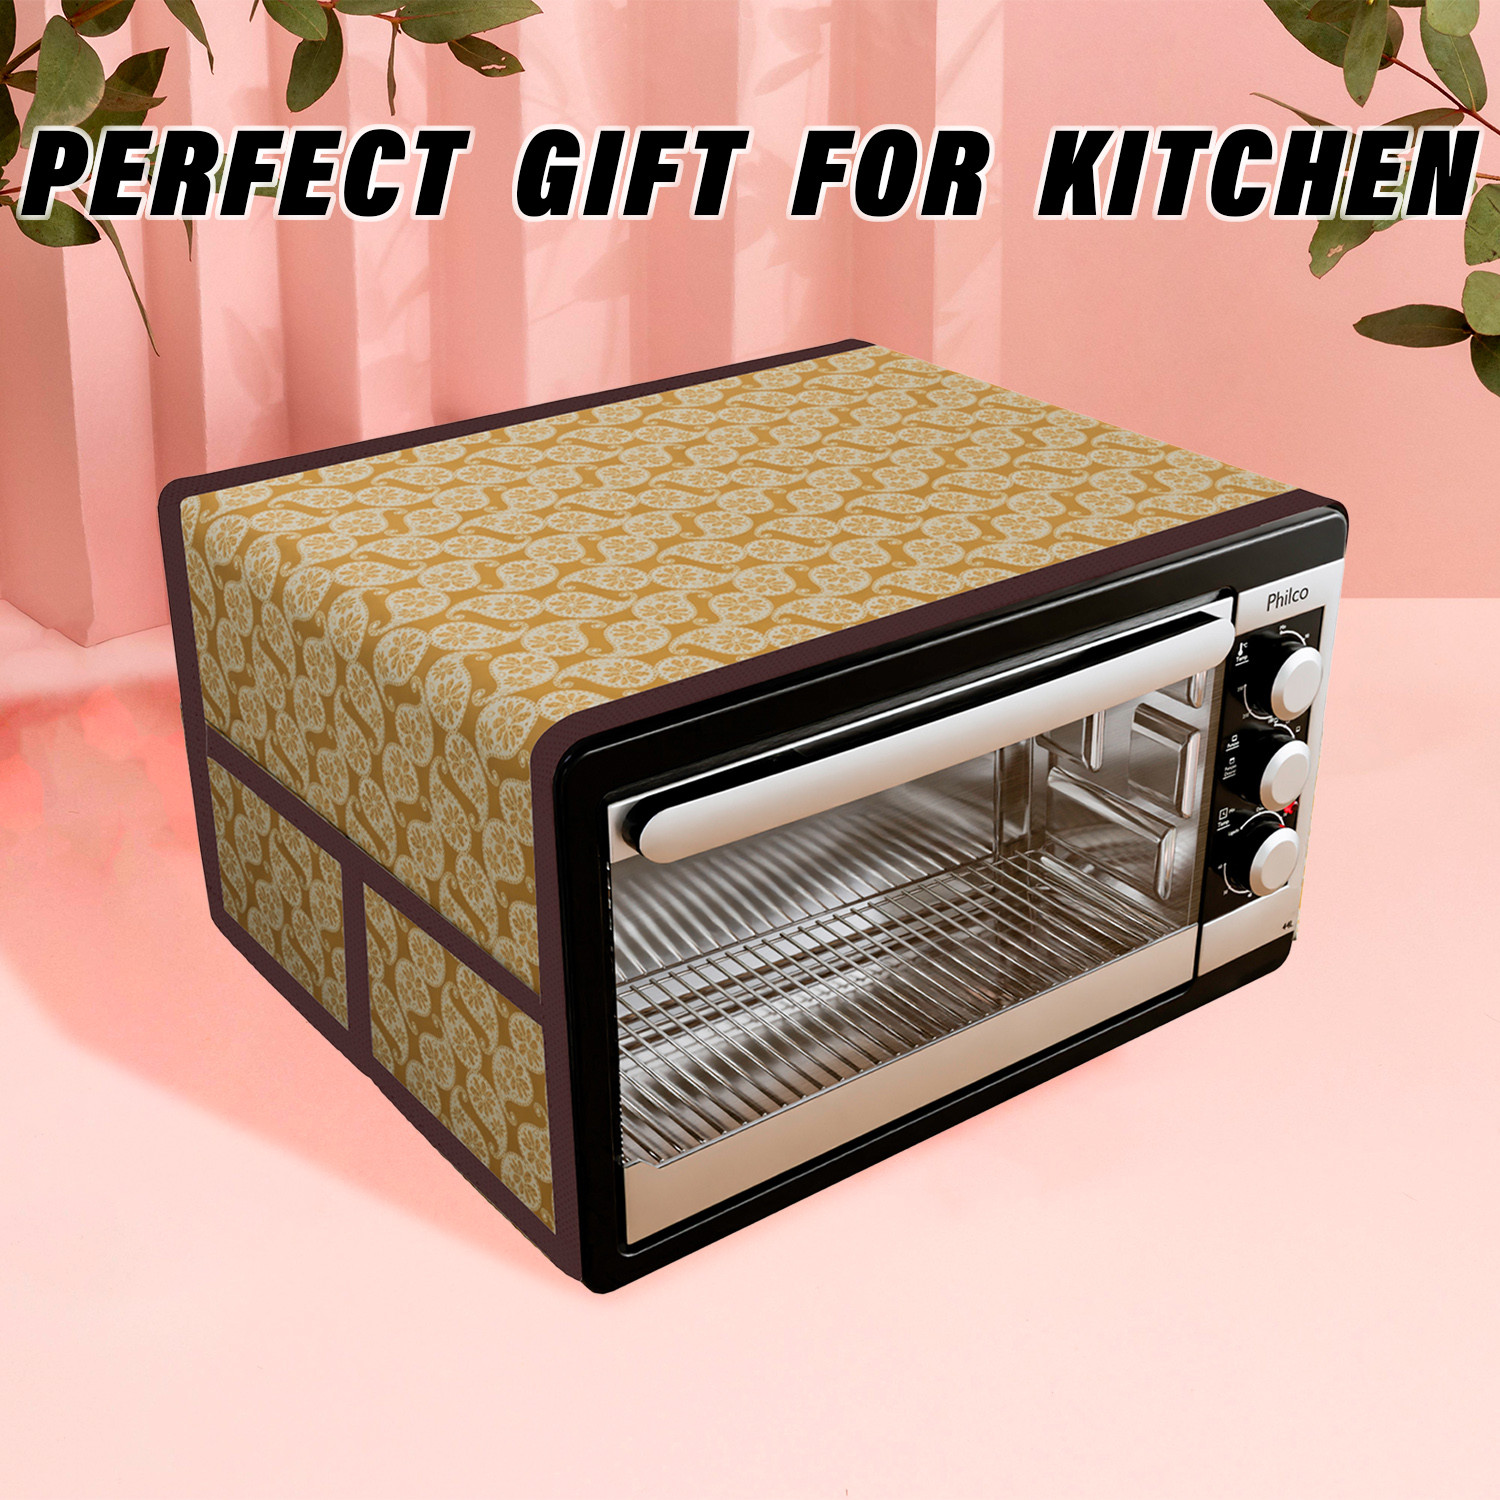 Kuber Industries Oven Top Cover | Microwave Oven Top Cover | Microwave Cover with 4 Utility Pockets | Oven Cover for Kitchen Décor | Carry Design Oven Top Cover | 60 LTR | Golden